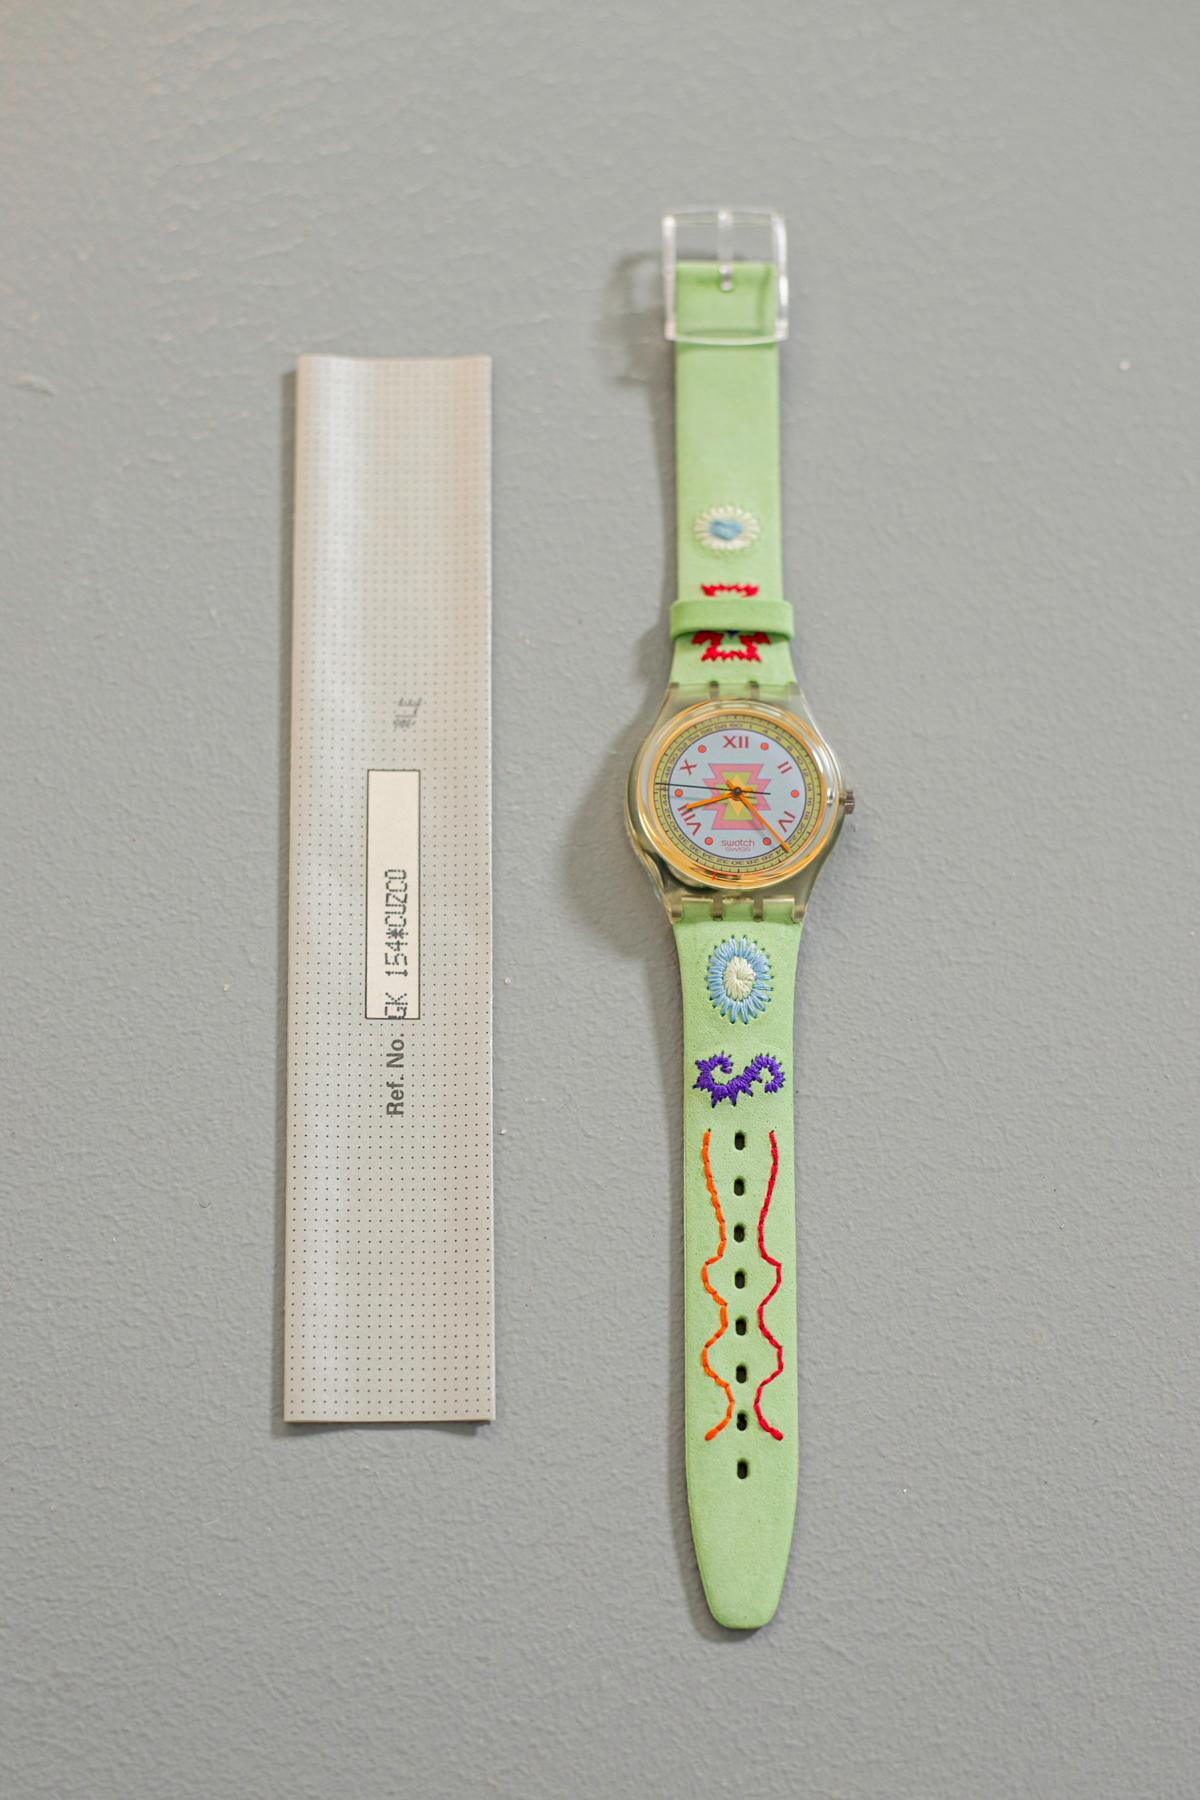 Vintage Swatch watch from the 1993 collection. Country and romantic design watch, along the strap there are colored embroideries with abstract figures, the skin is a delicate pastel green color perfect to combine with an embroidered day maxi dress.